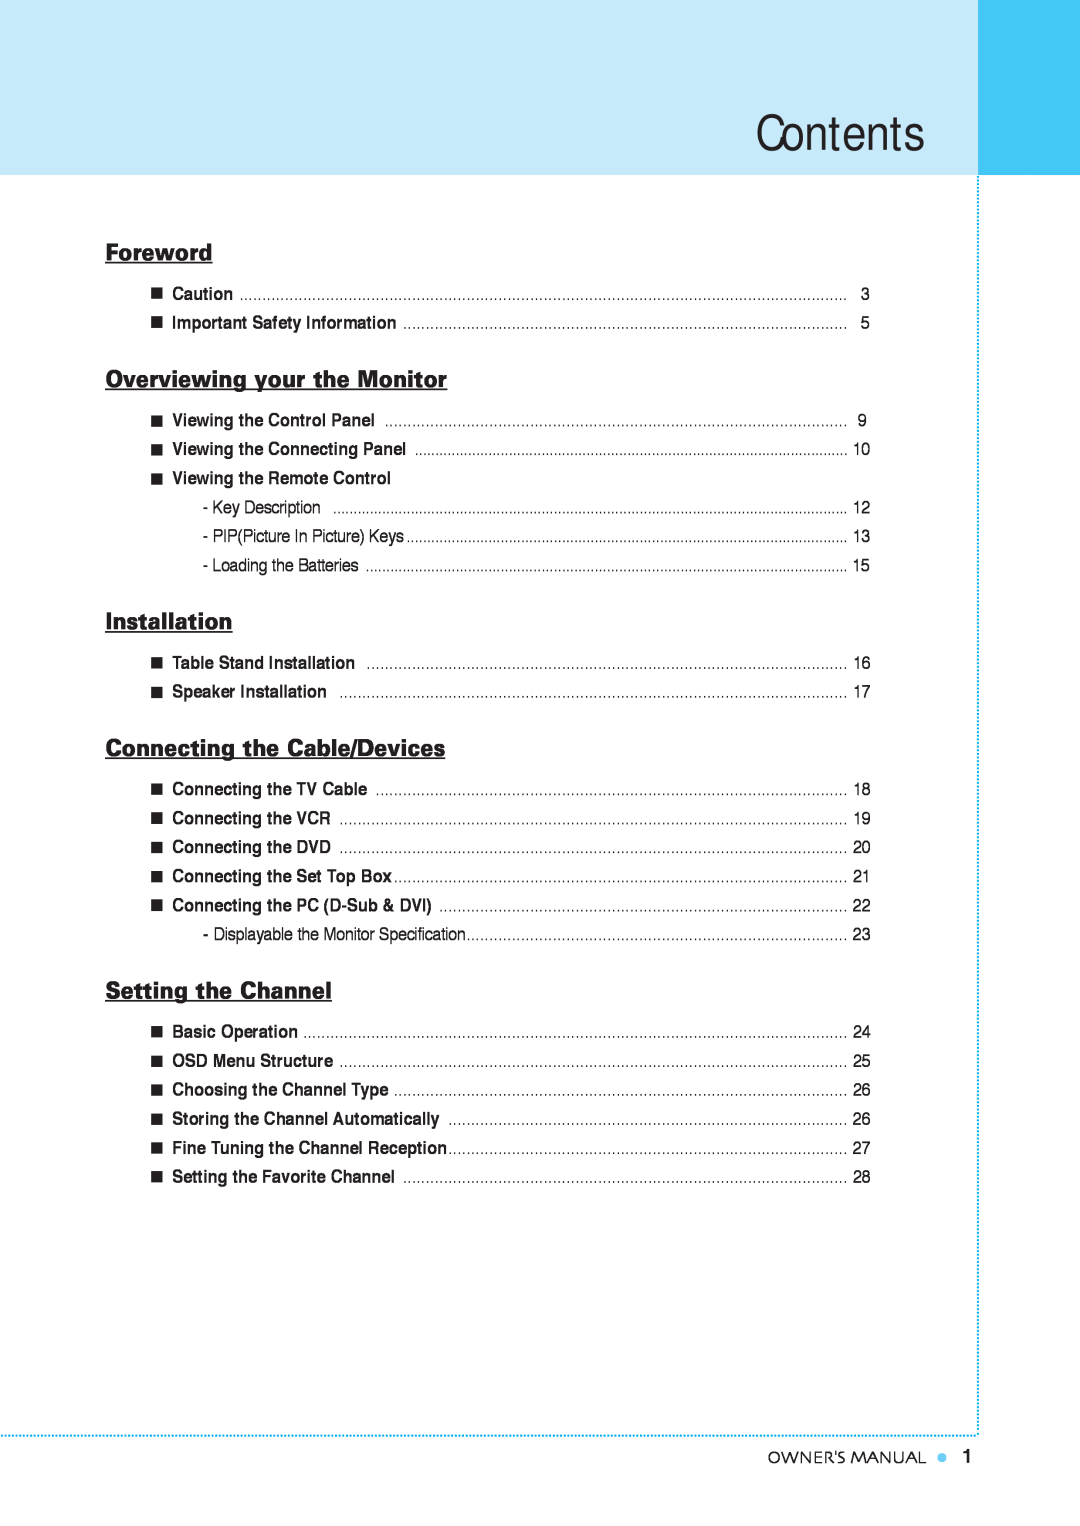 InFocus TD32 Contents, Foreword, Overviewing your the Monitor, Installation, Connecting the Cable/Devices, Owners Manual 